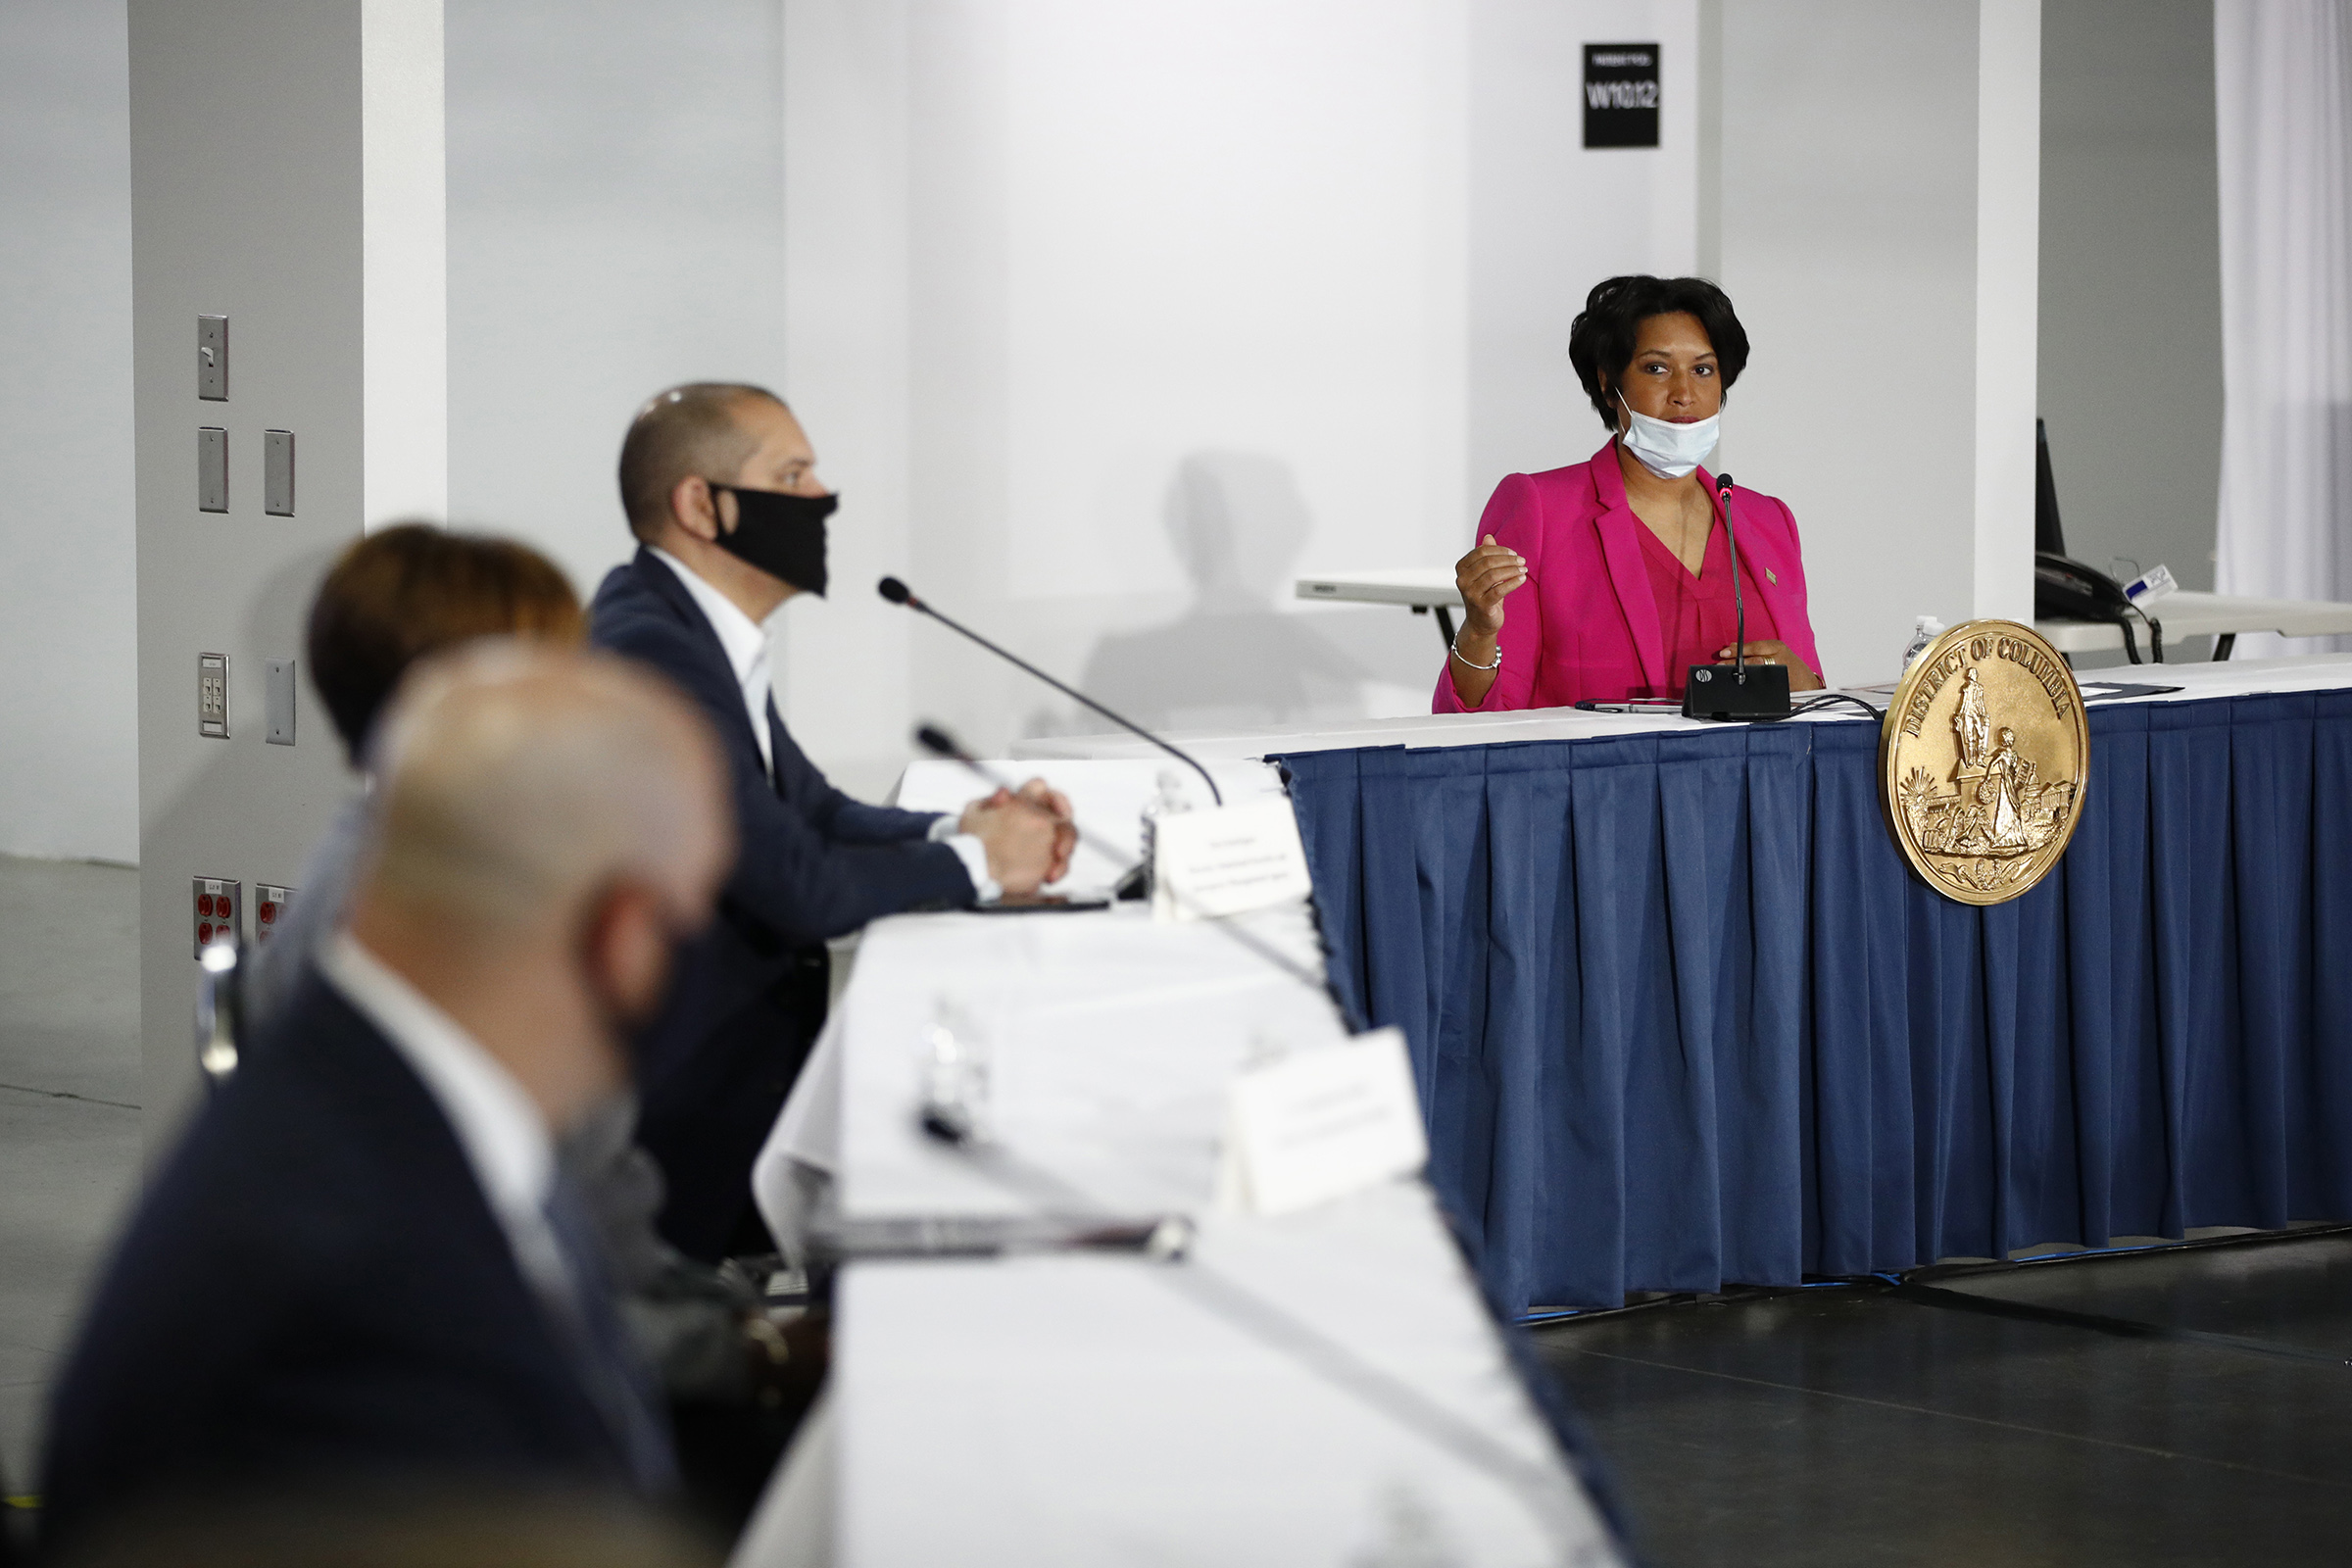 D.C. Mayor Muriel Bowser, right, speaks during a news conference about the coronavirus inside the Walter E. Washington Convention Center on May 11. (Patrick Semansky—AP)